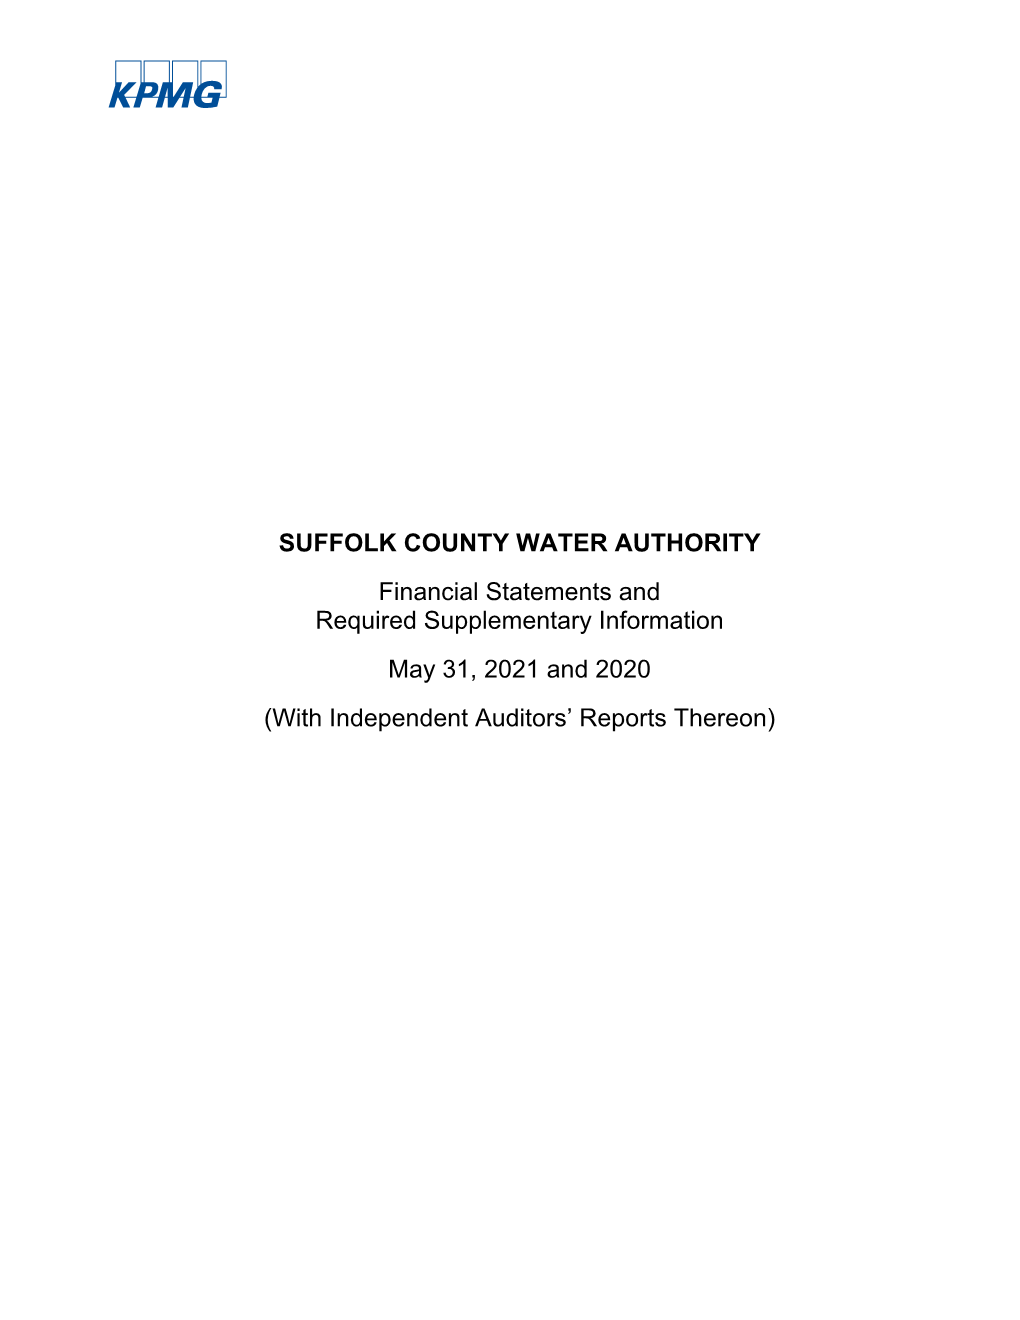 SUFFOLK COUNTY WATER AUTHORITY Financial Statements and Required Supplementary Information May 31, 2021 and 2020 (With Independent Auditors’ Reports Thereon)